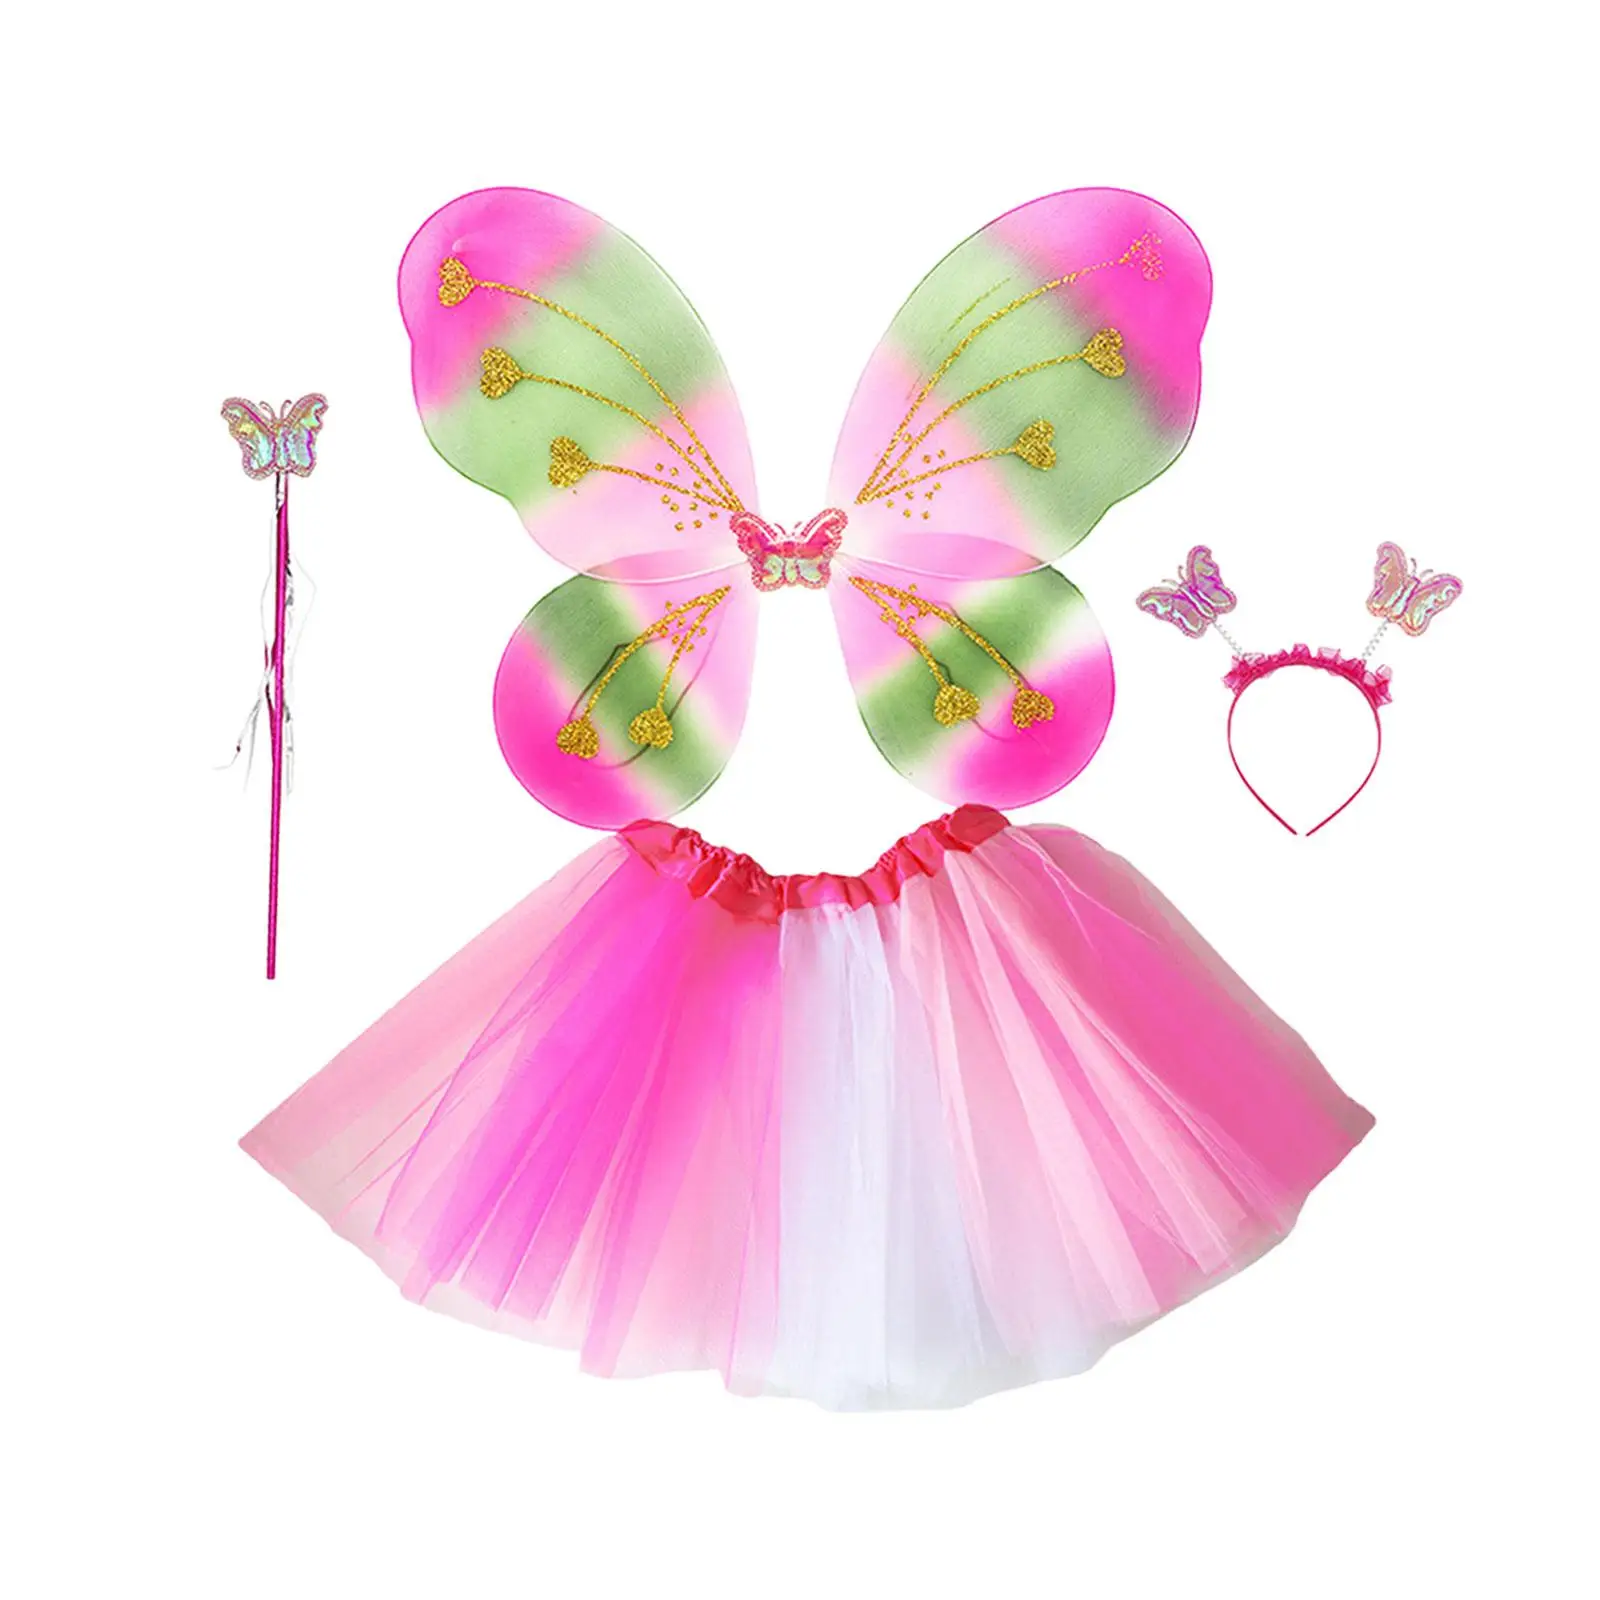 Fairy Wing for Girls Cosplay Clothes Children Girls Decorative Gifts Angel Wing for Carnival Party Festival Pretend Play